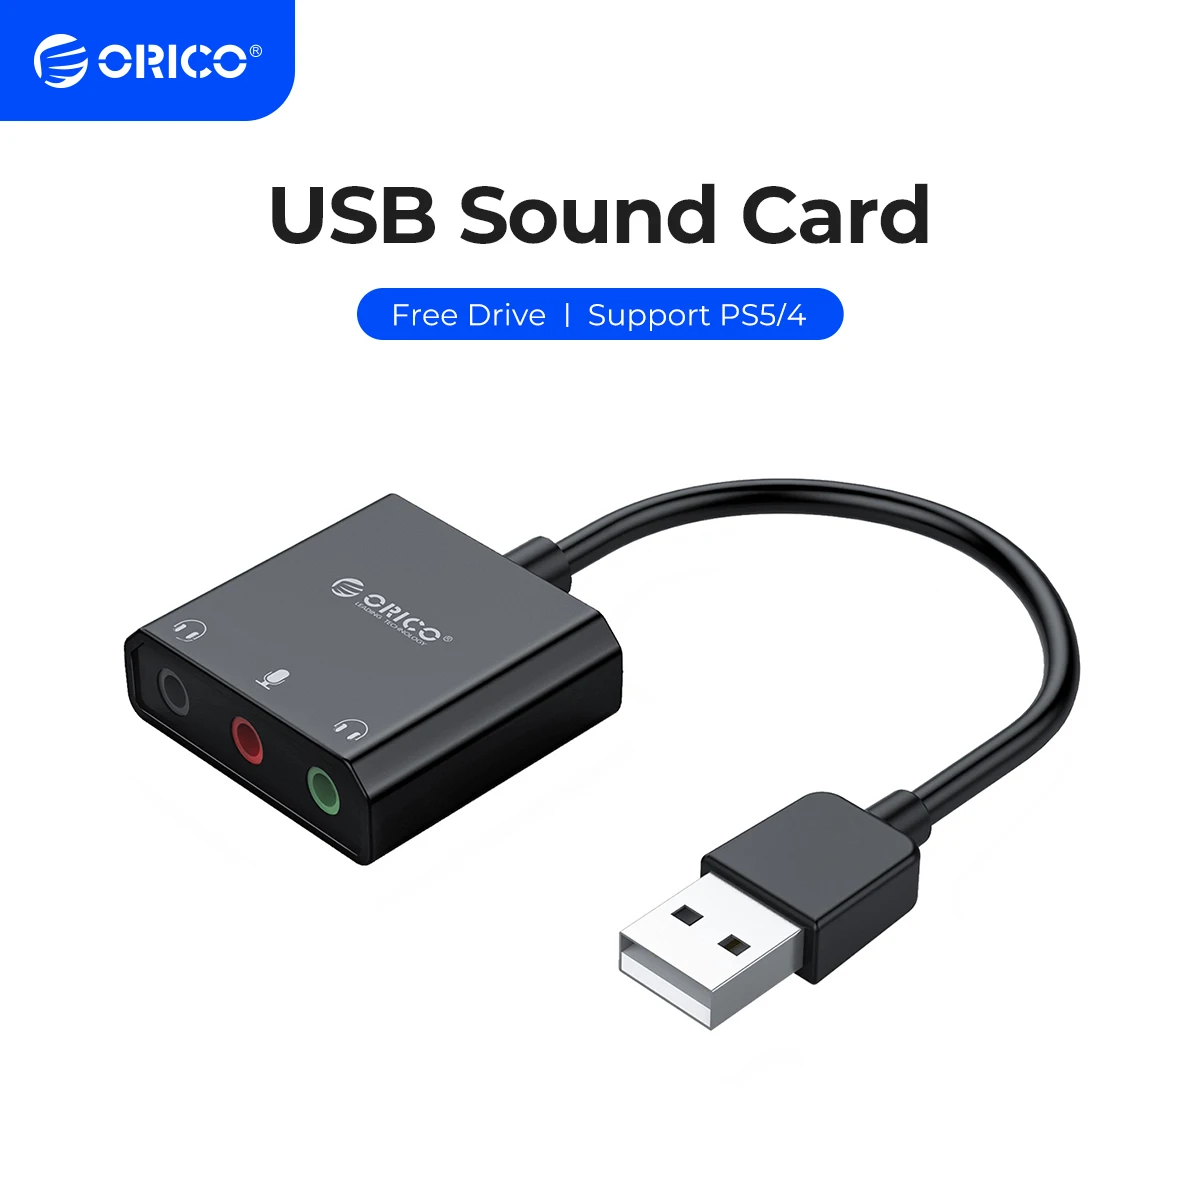 orico-usb-external-sound-card-2-in-1-audio-adapter-35mm-microphone-earphone-interface-volume-adjustable-soundcard-for-ps4-phone